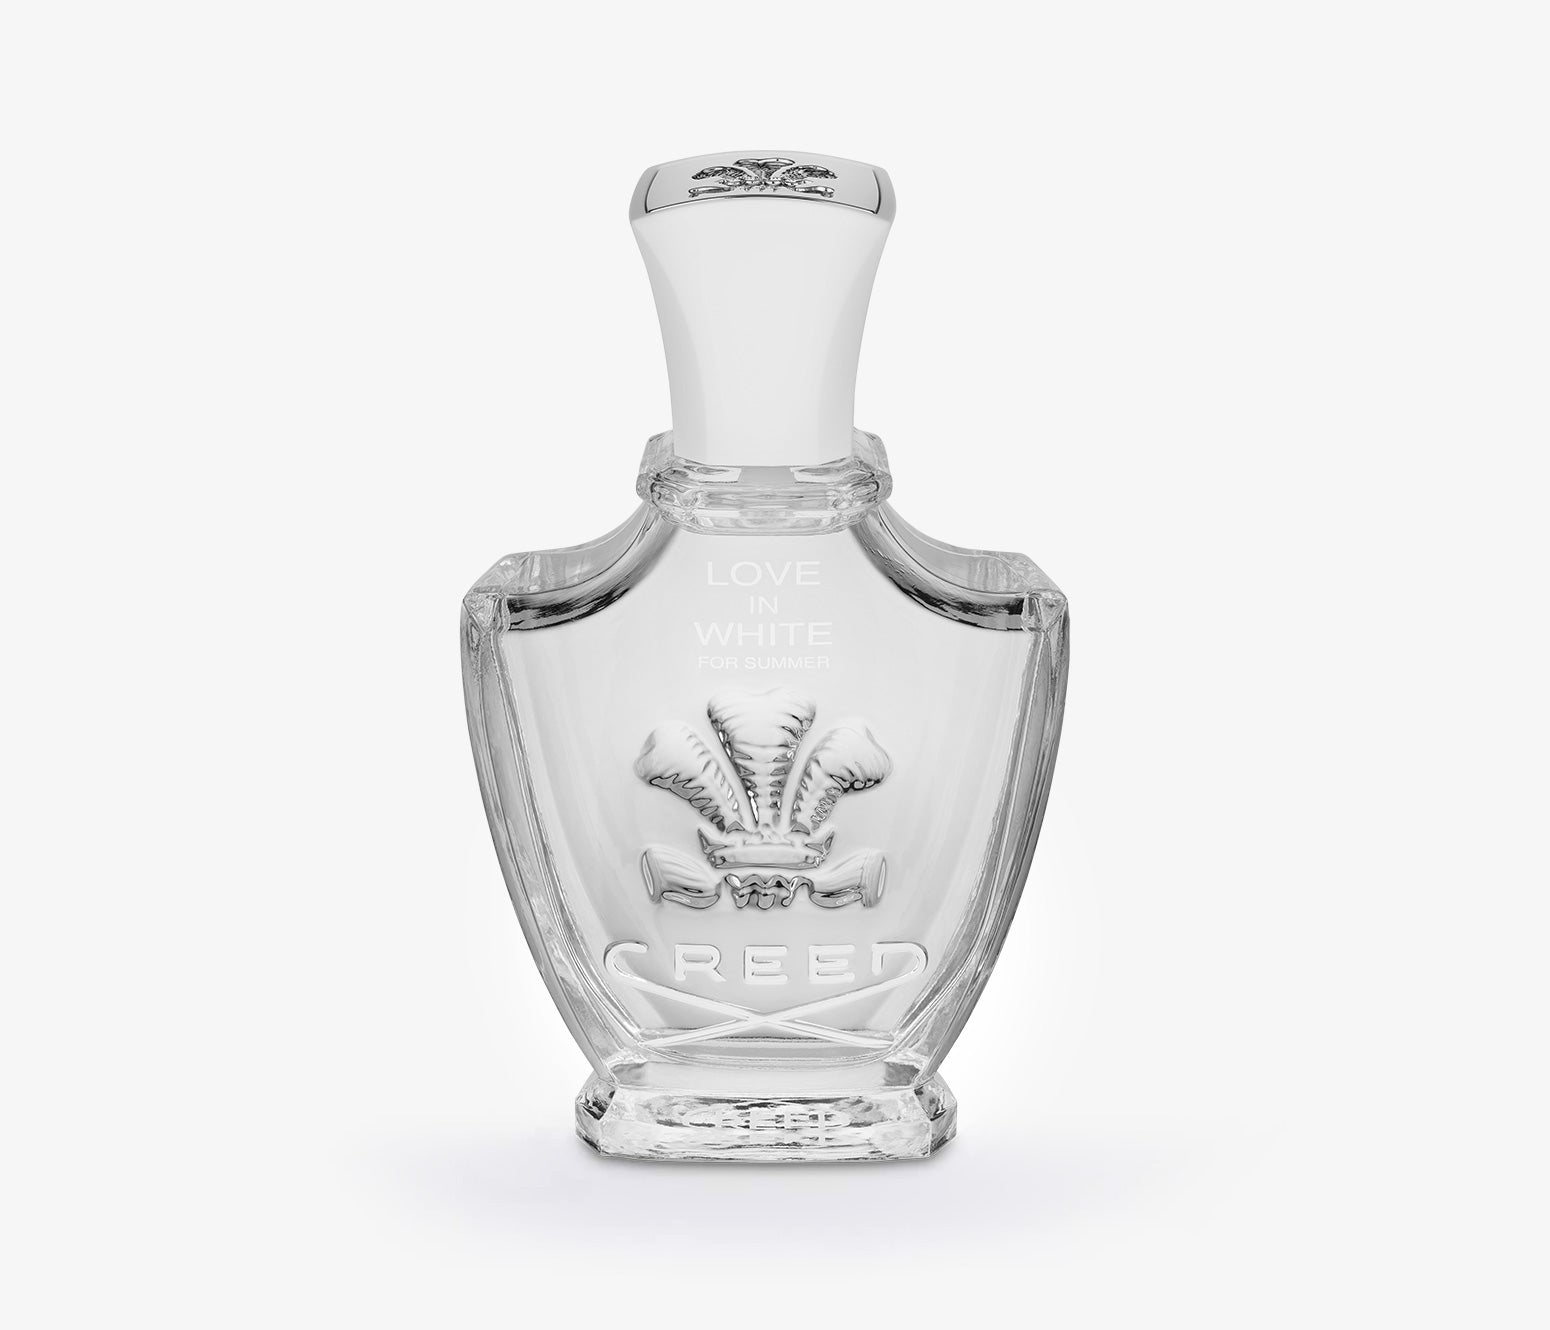 Creed - Love in White for Summer - 30ml - QII001 - product image - Fragrance - Les Senteurs